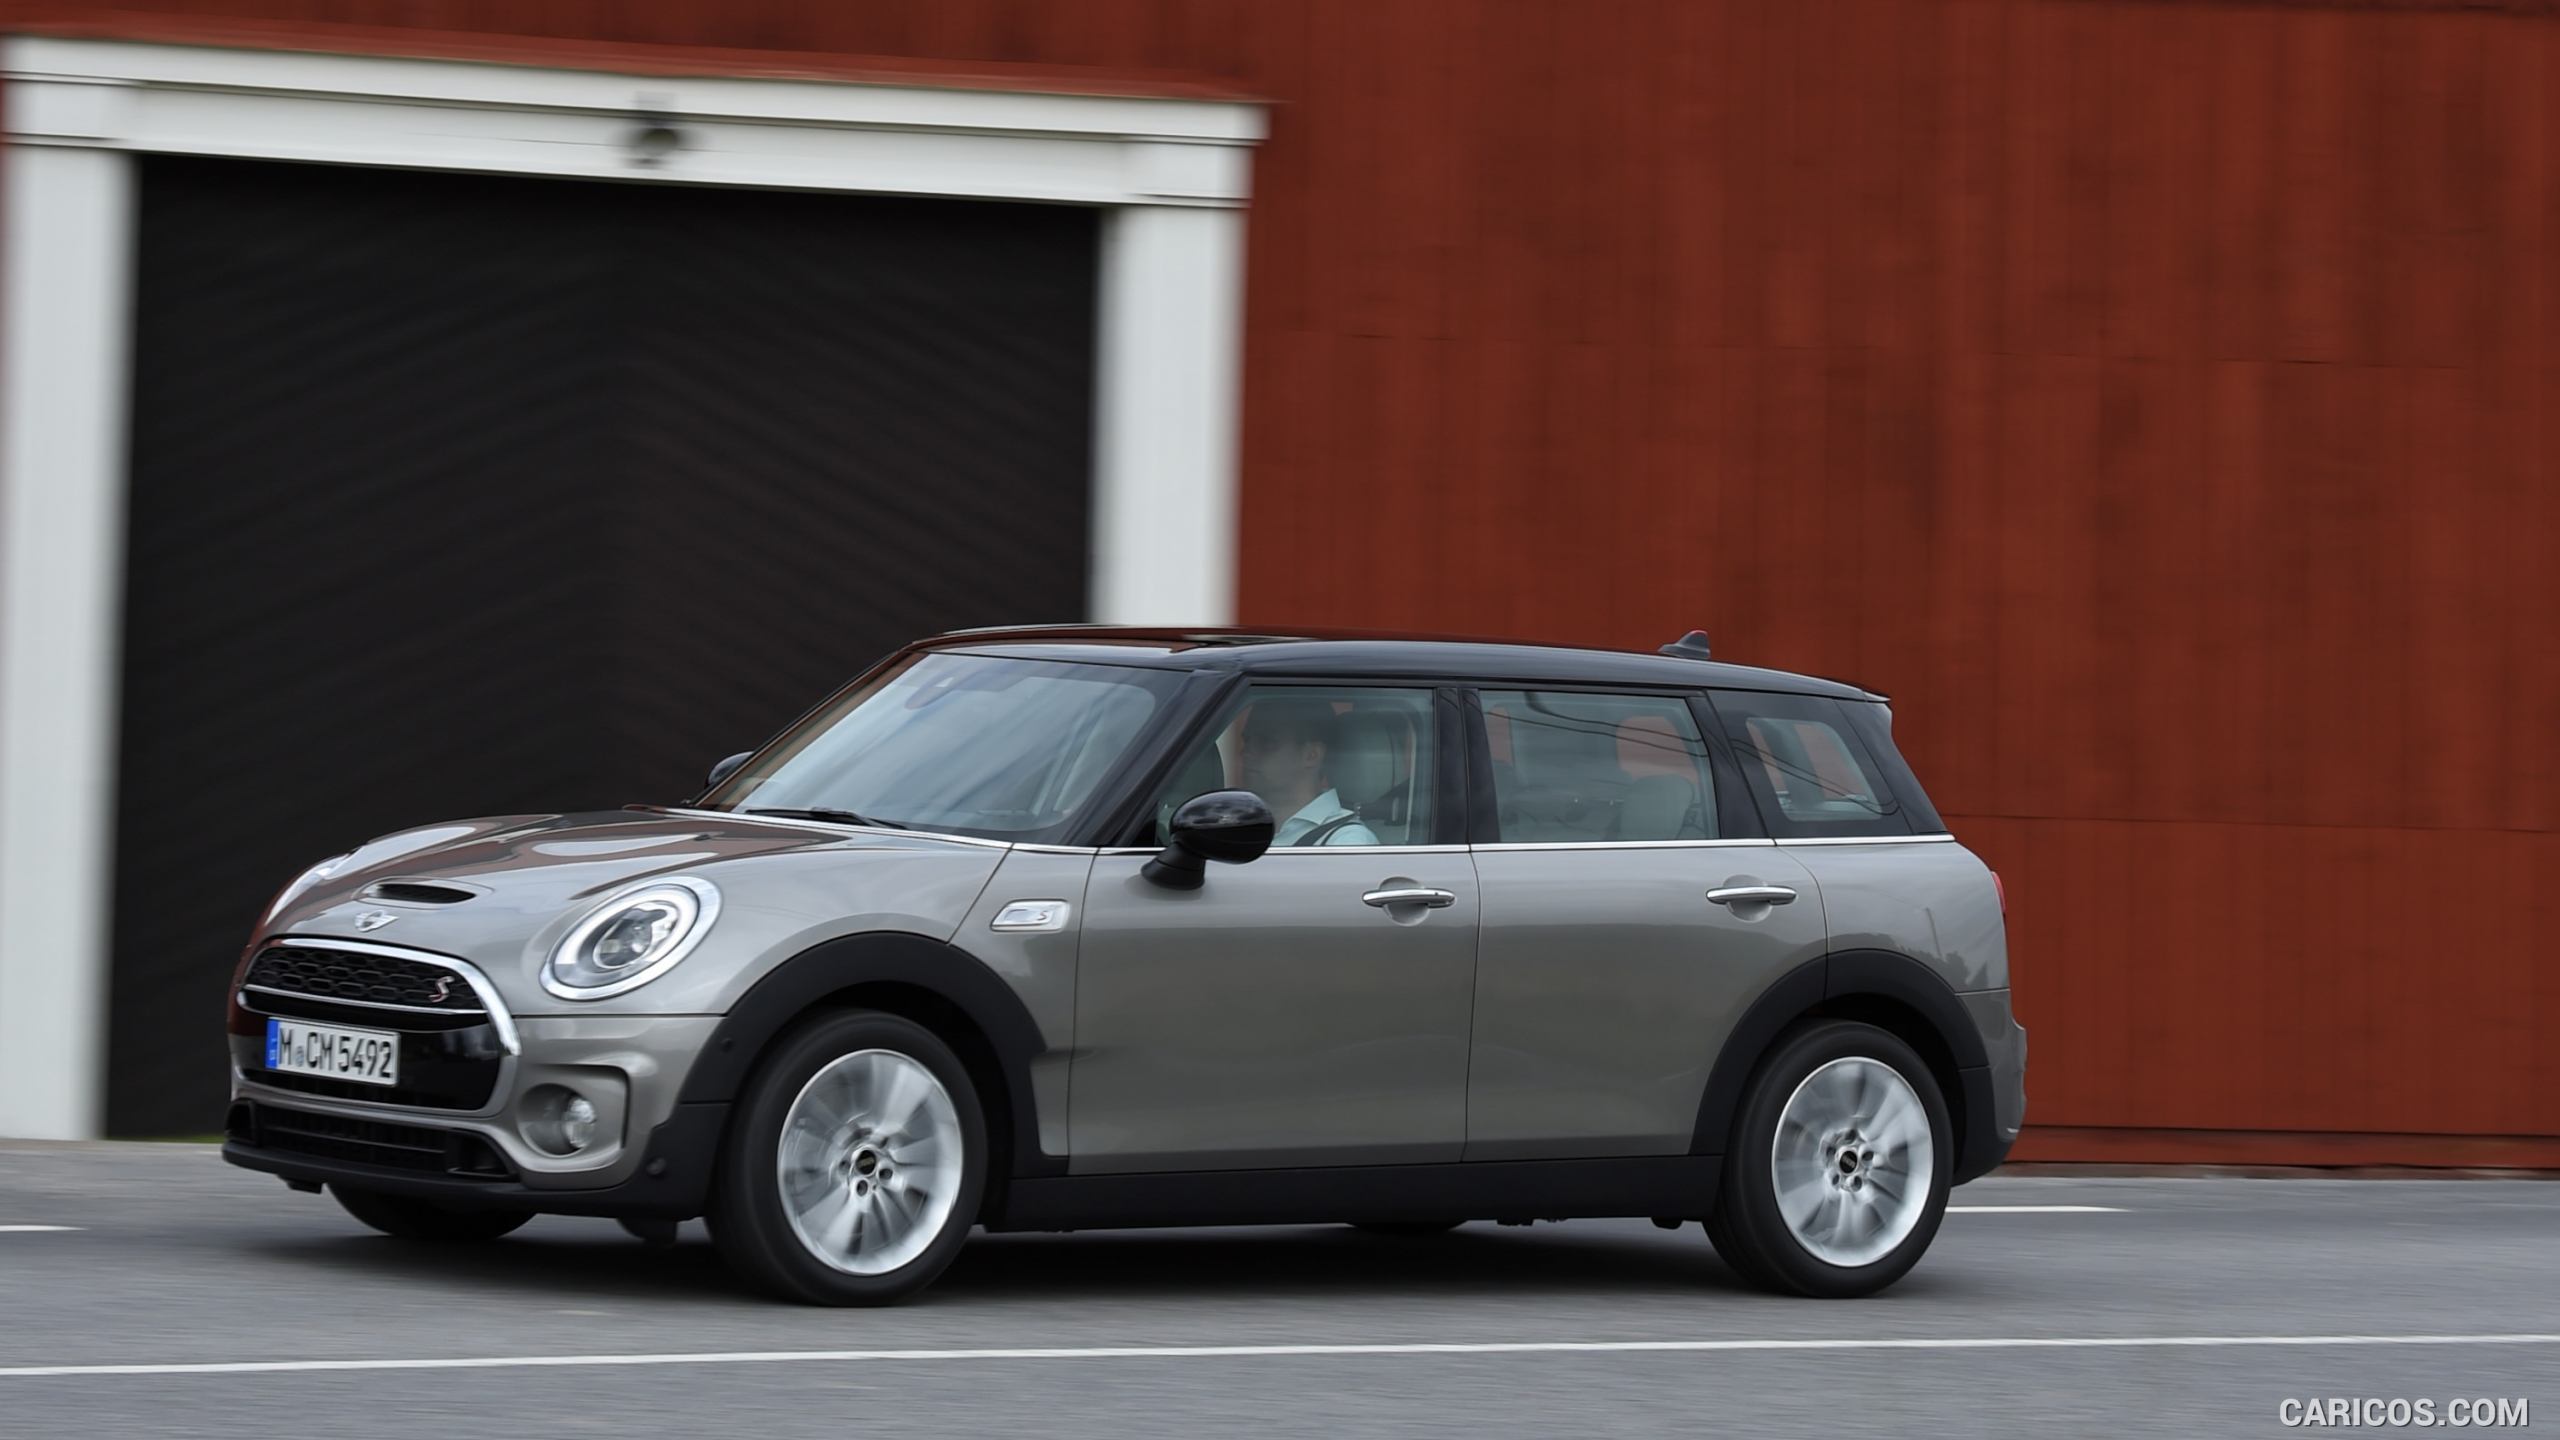 2016 MINI Cooper S Clubman in Metallic Melting Silver - Side, #200 of 380